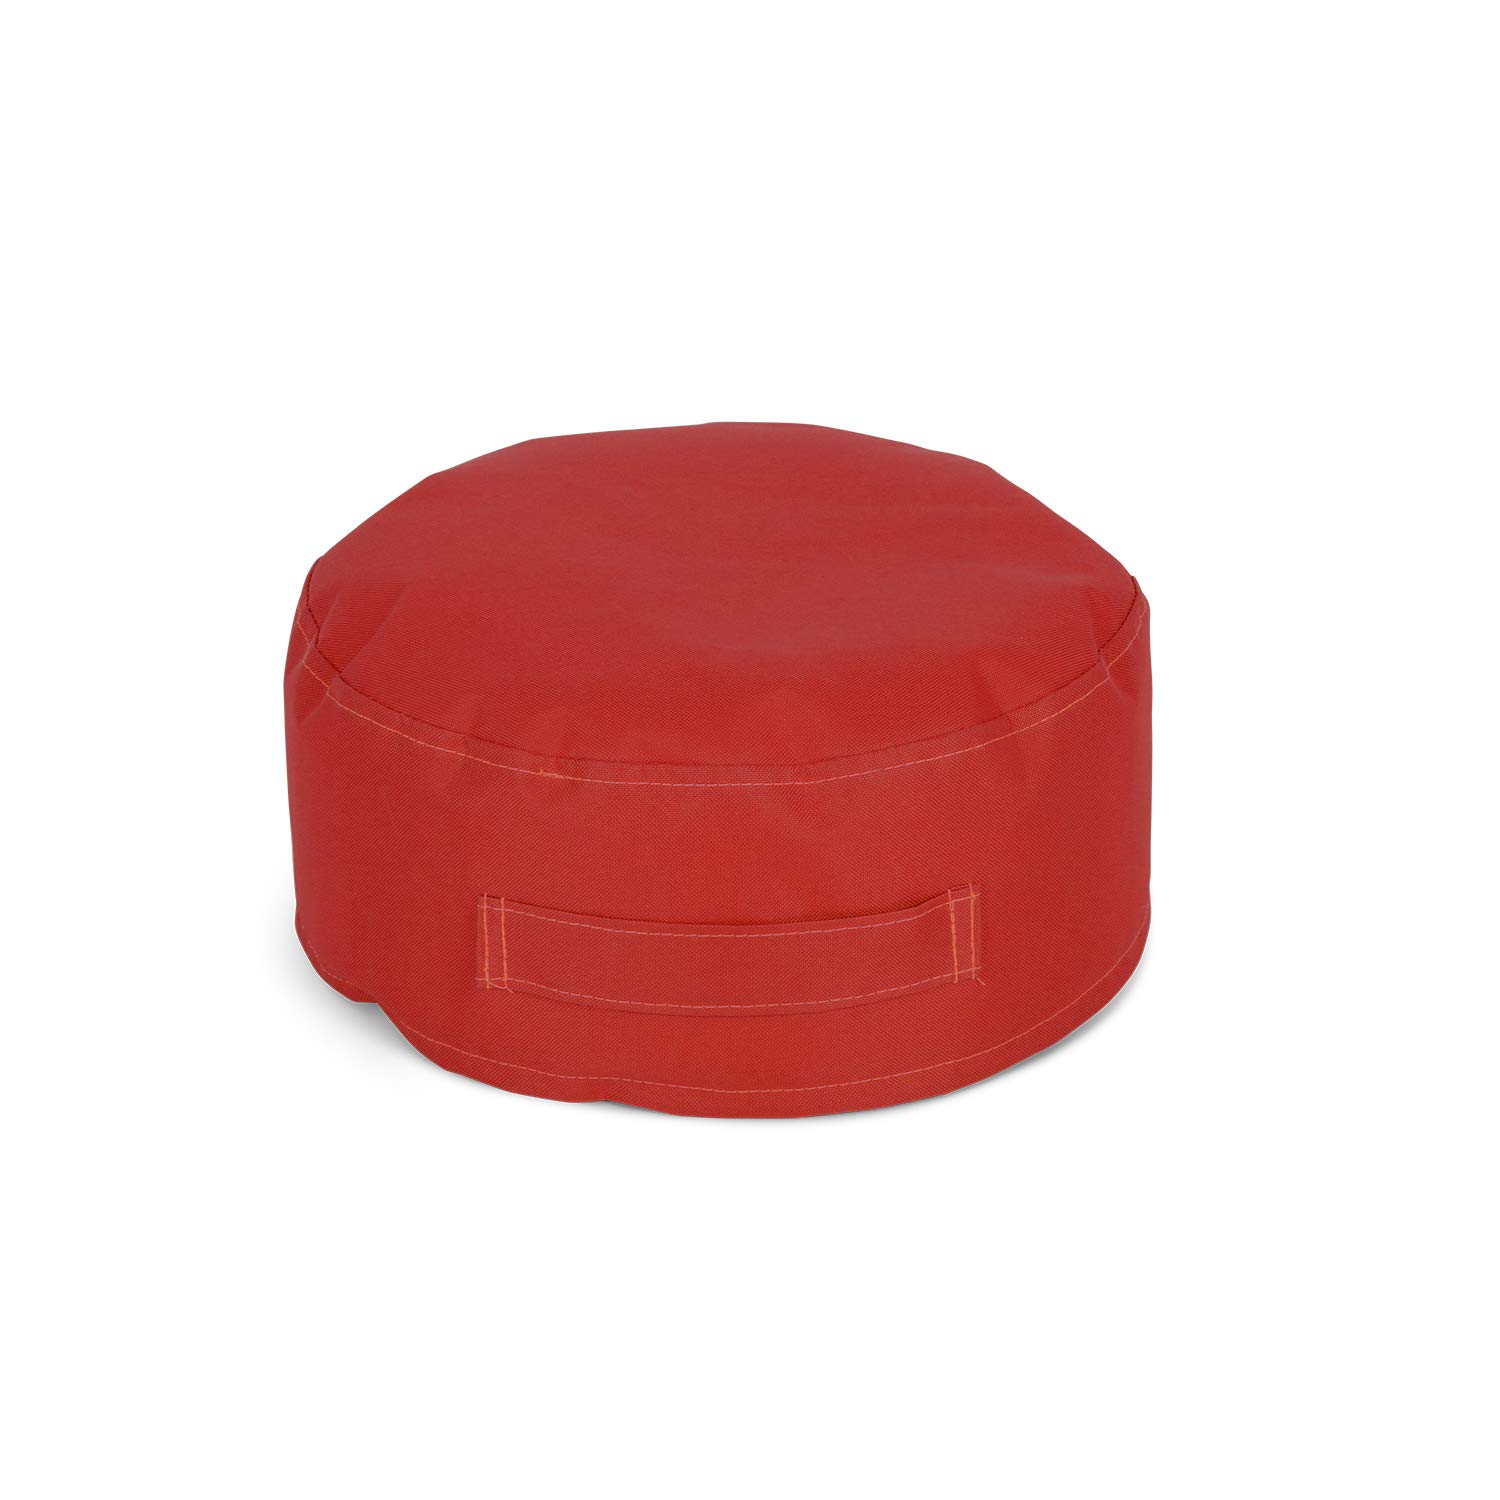 Knorr-Baby 440005 Stool Round S Colour Red